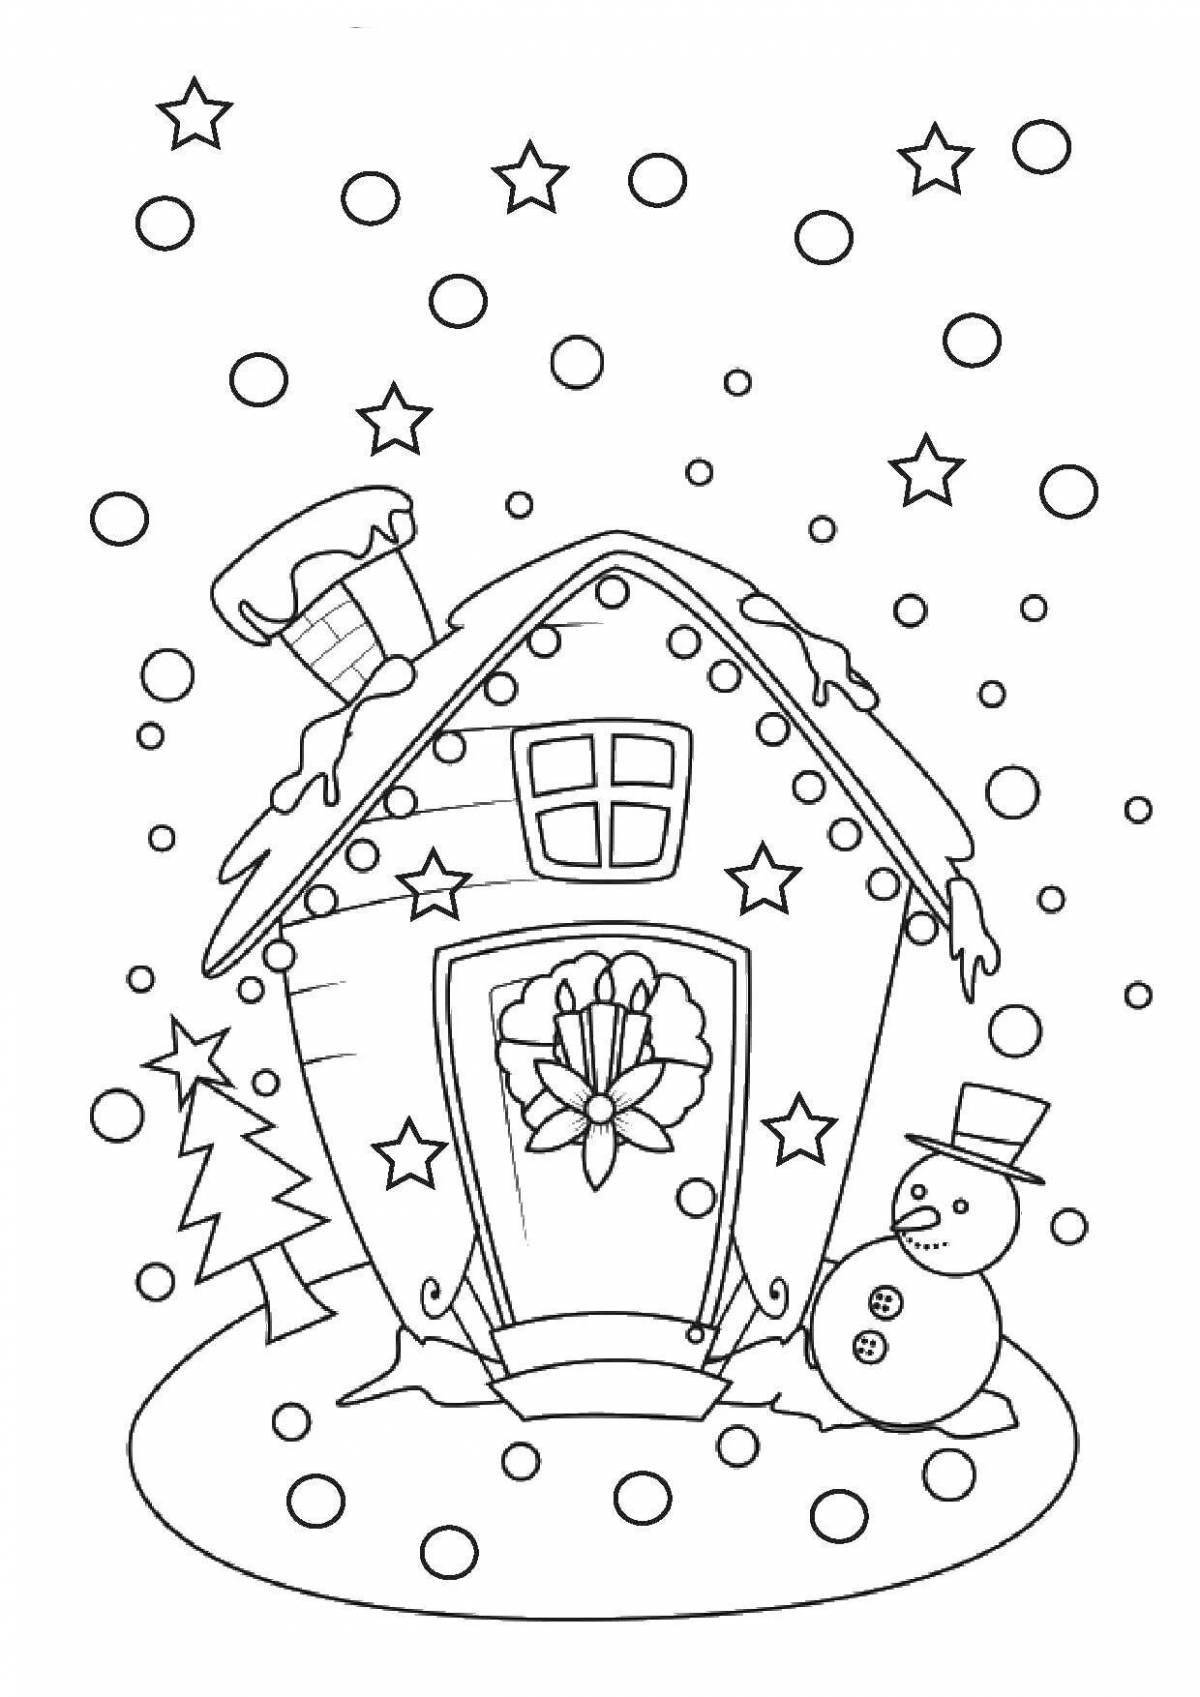 Colouring a gorgeous winter house for kids